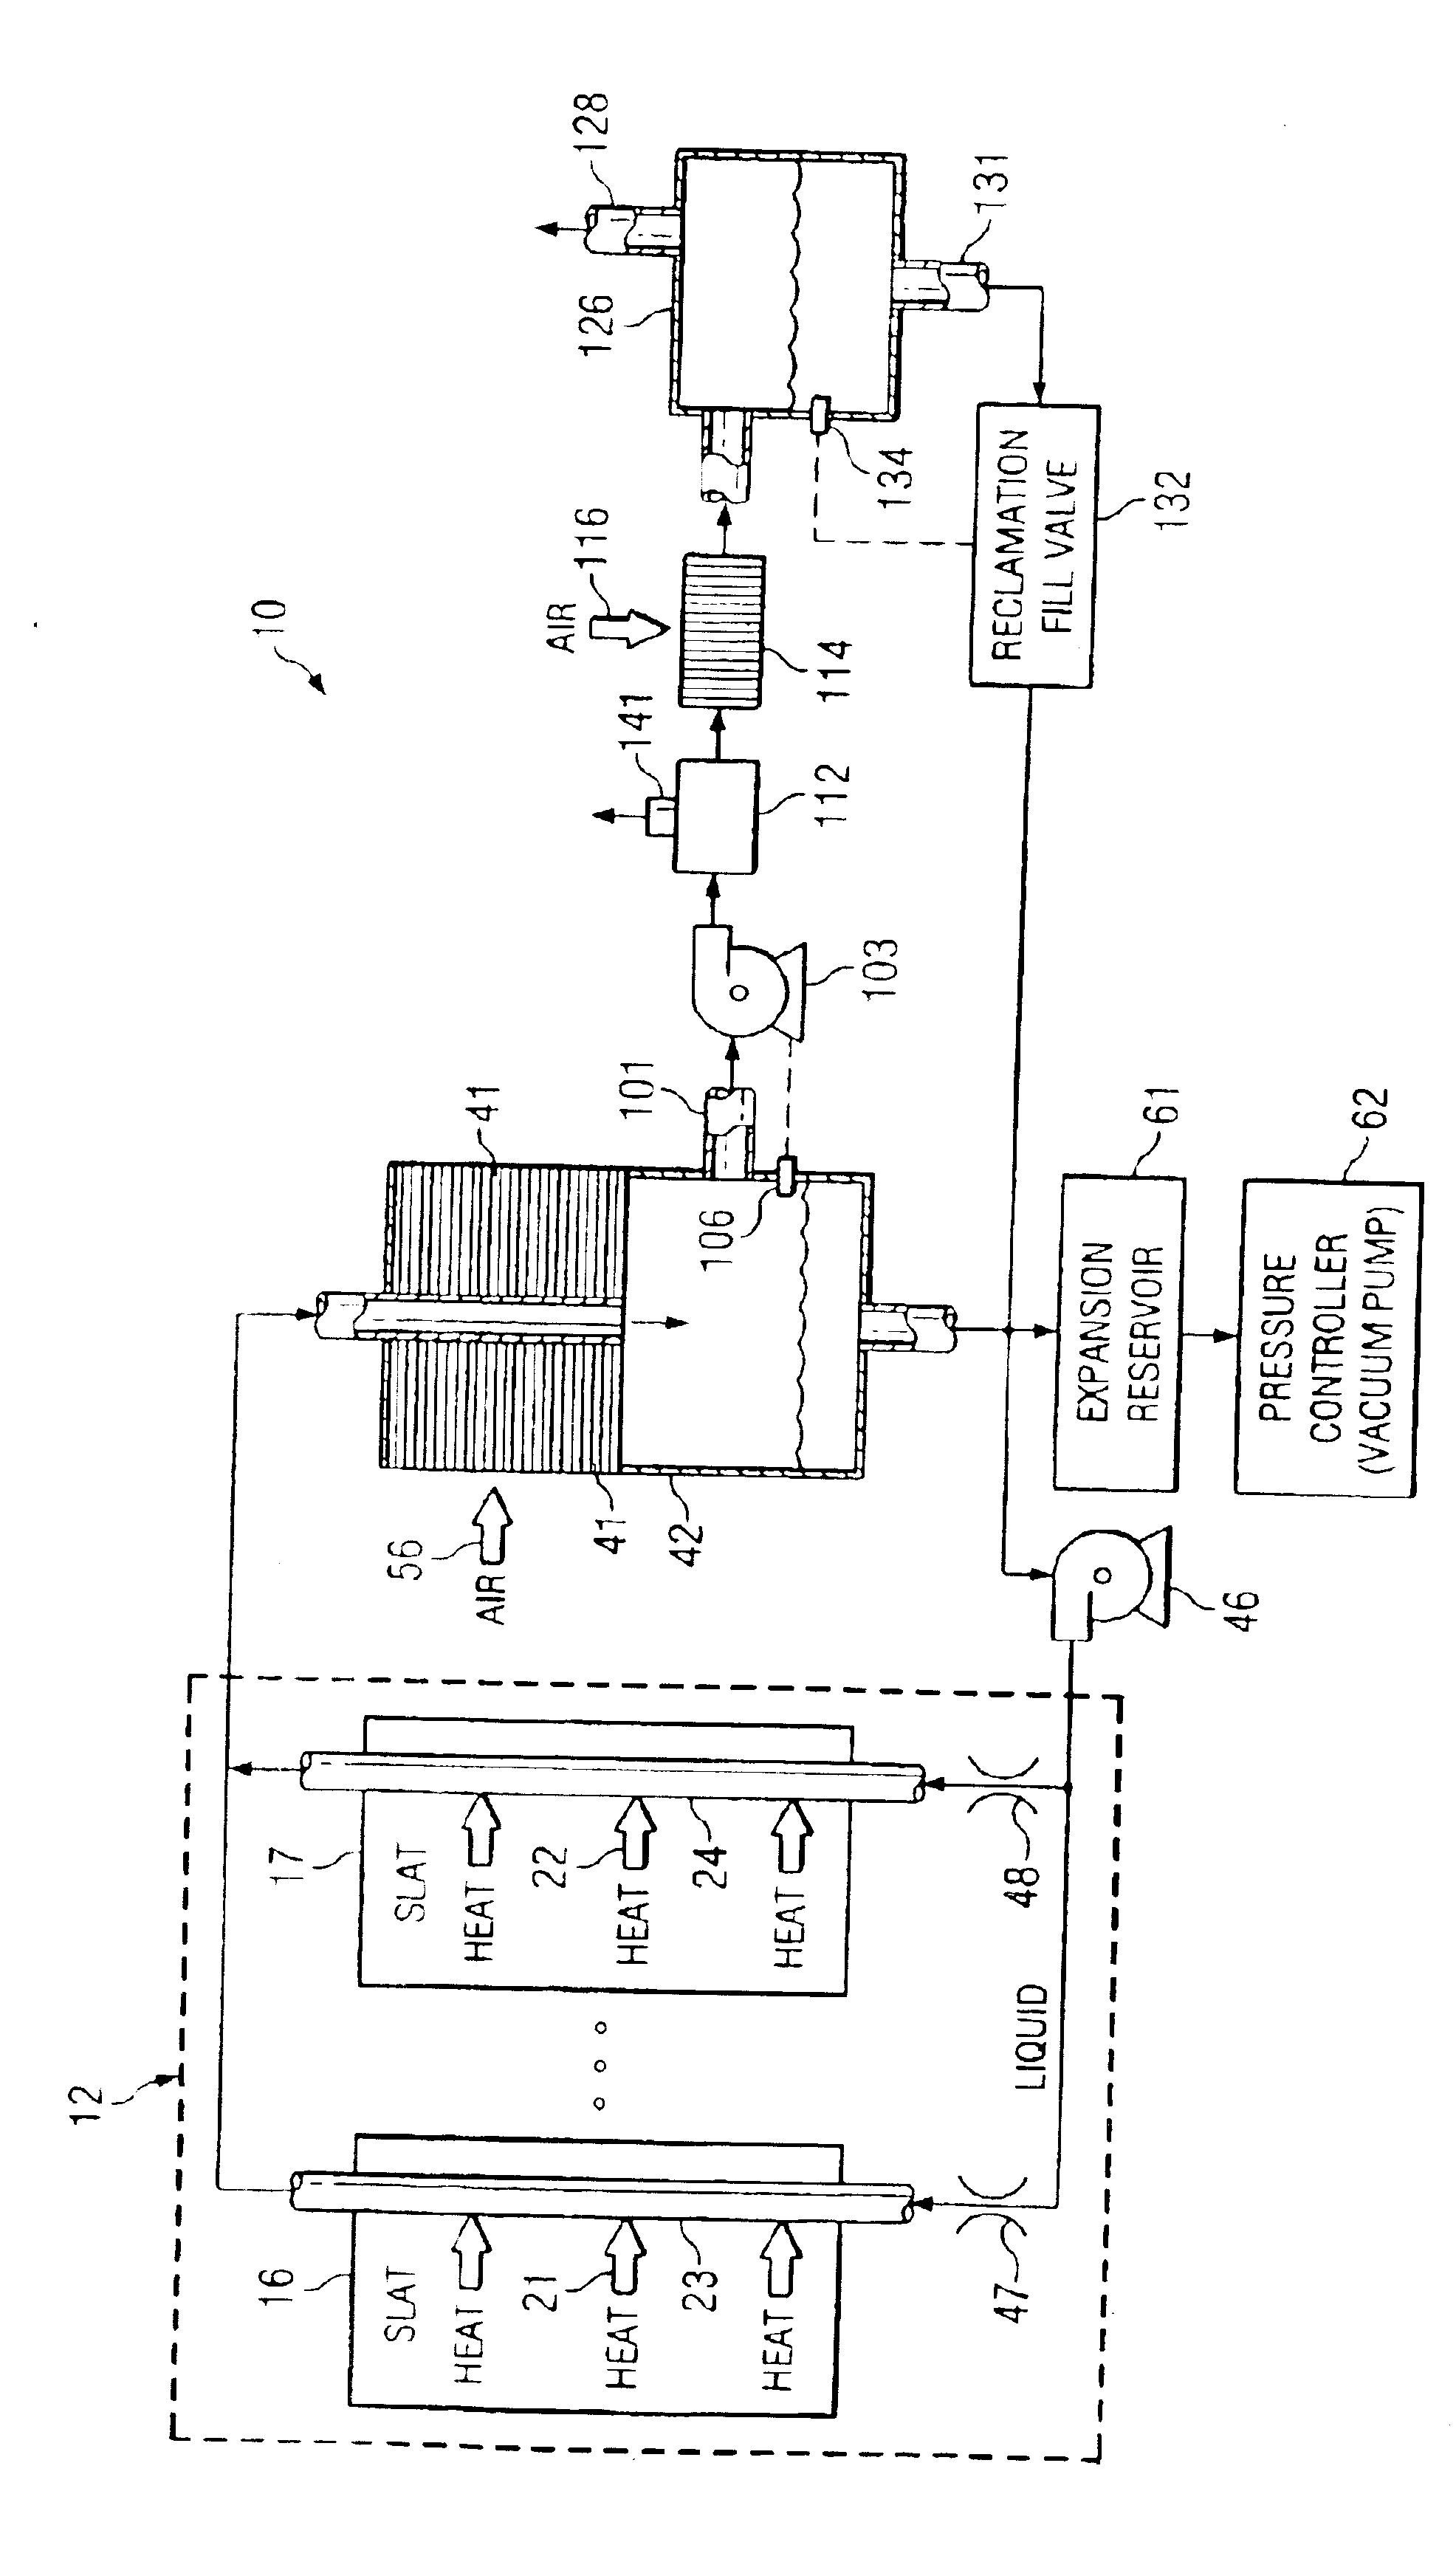 Method and apparatus for extracting non-condensable gases in a cooling system